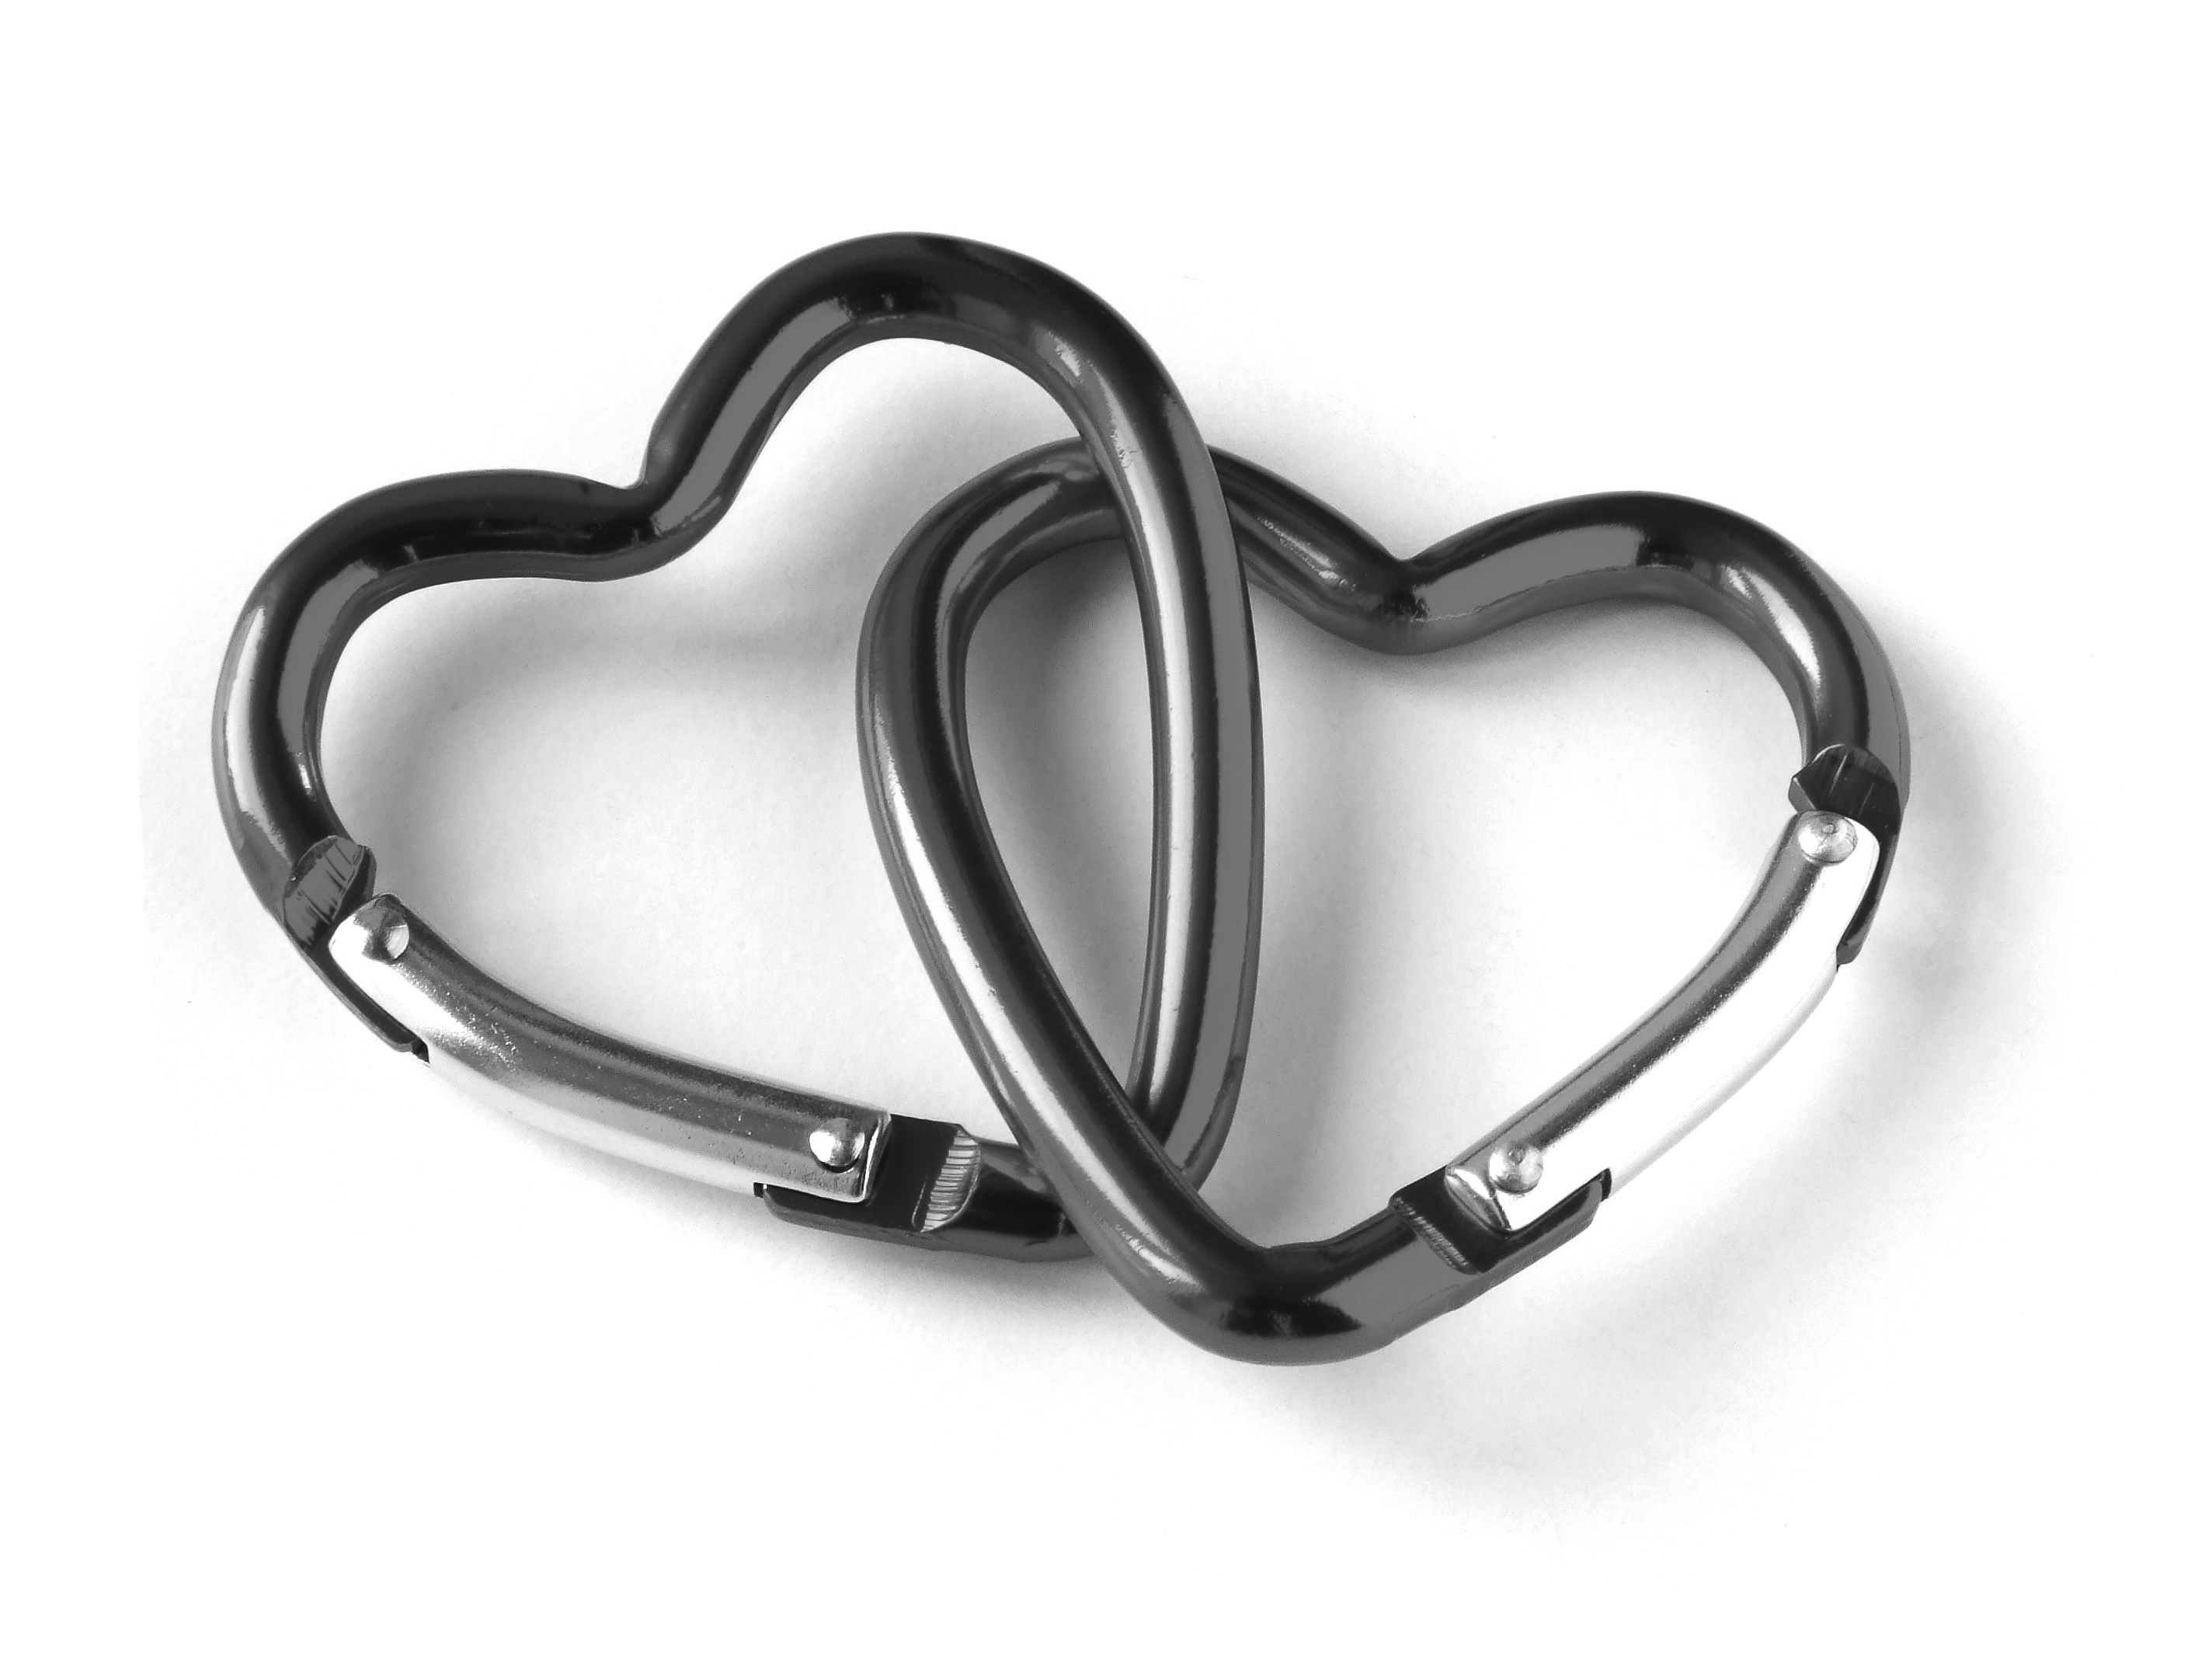 Black and white hearts